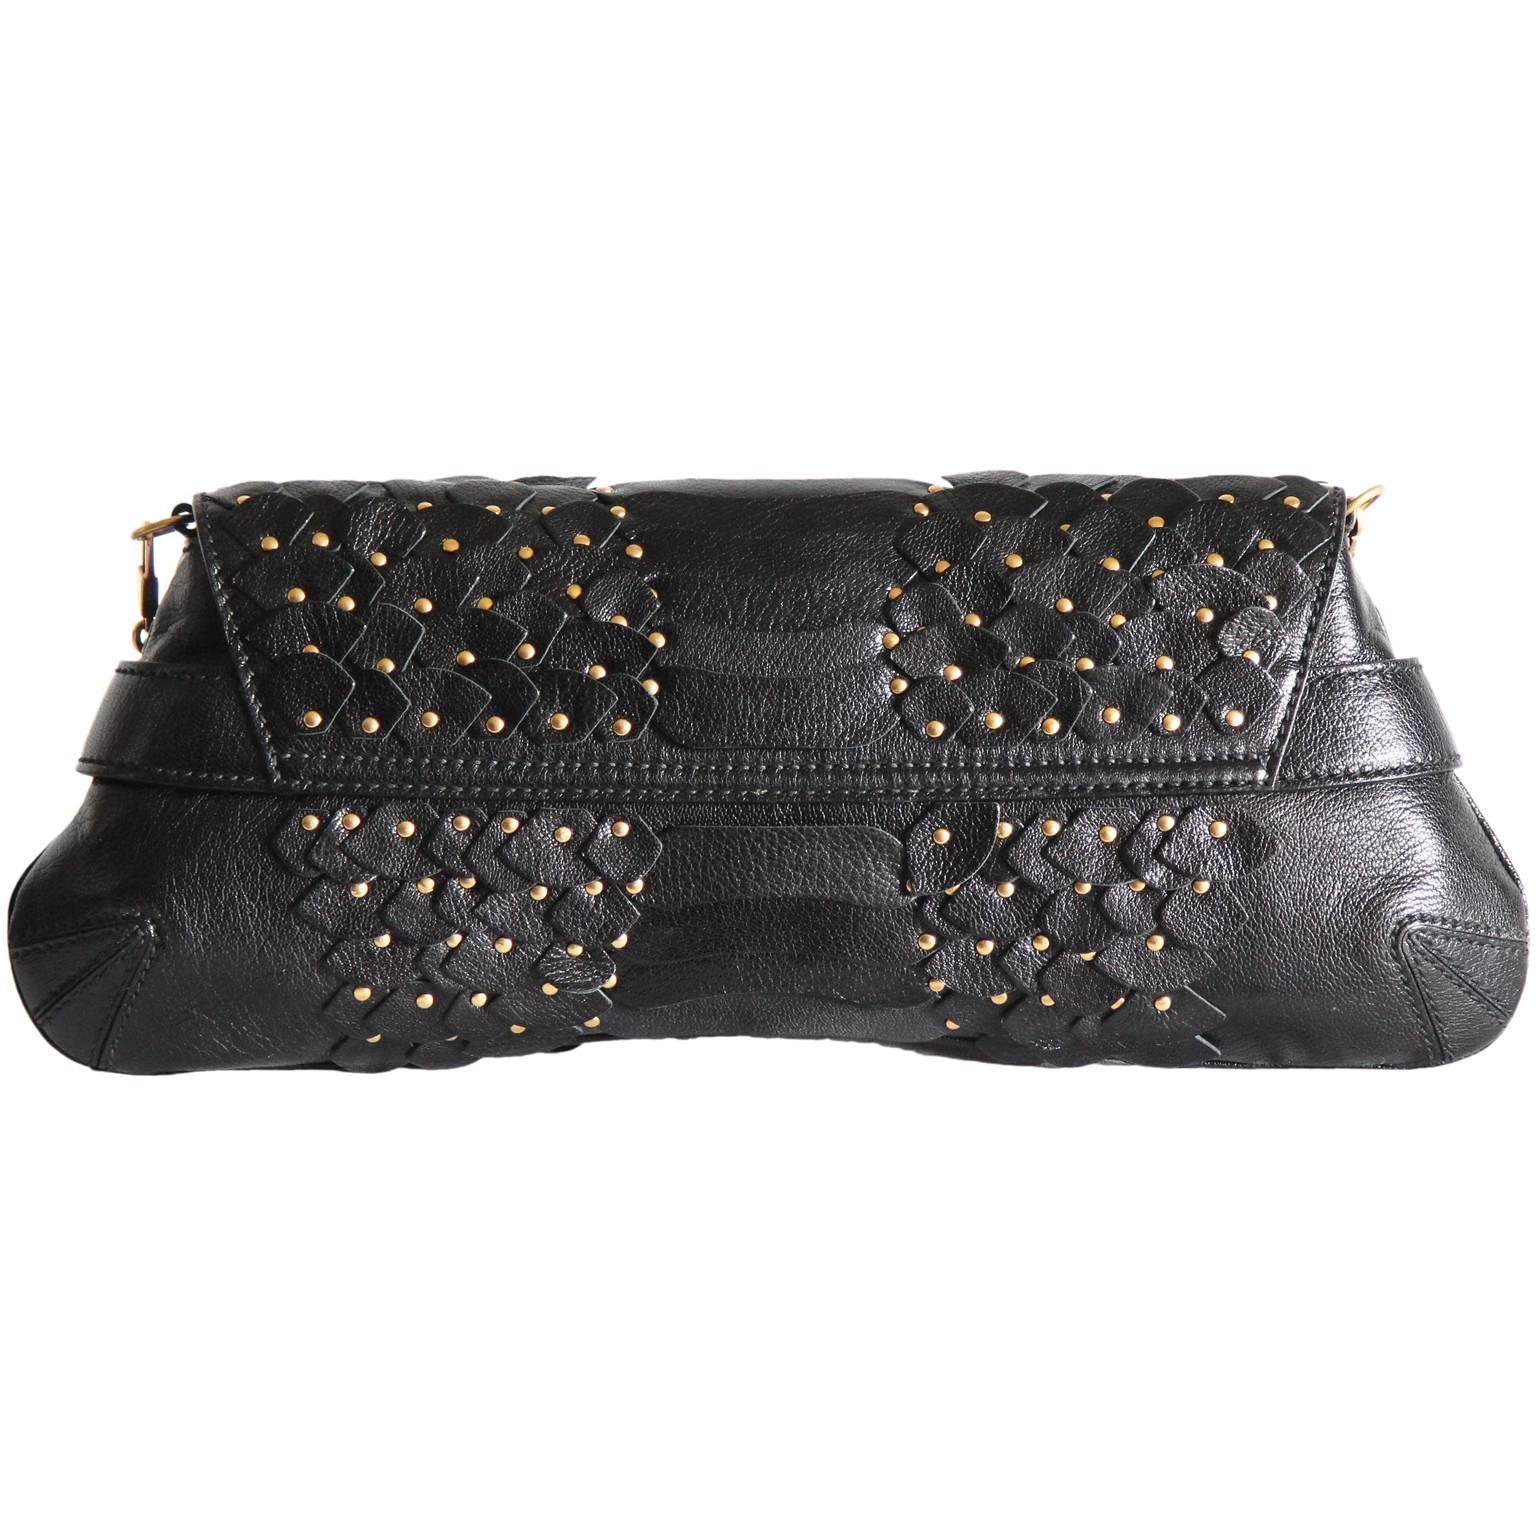 One of the most memorable Tom Ford for Gucci pieces of all... that ridiculously chic and insanely structured Tom Ford for Gucci Fall Winter 2003 black pieced-together and studded leather 'scaled' horsebit bag!

The Iconic Collections has been one of